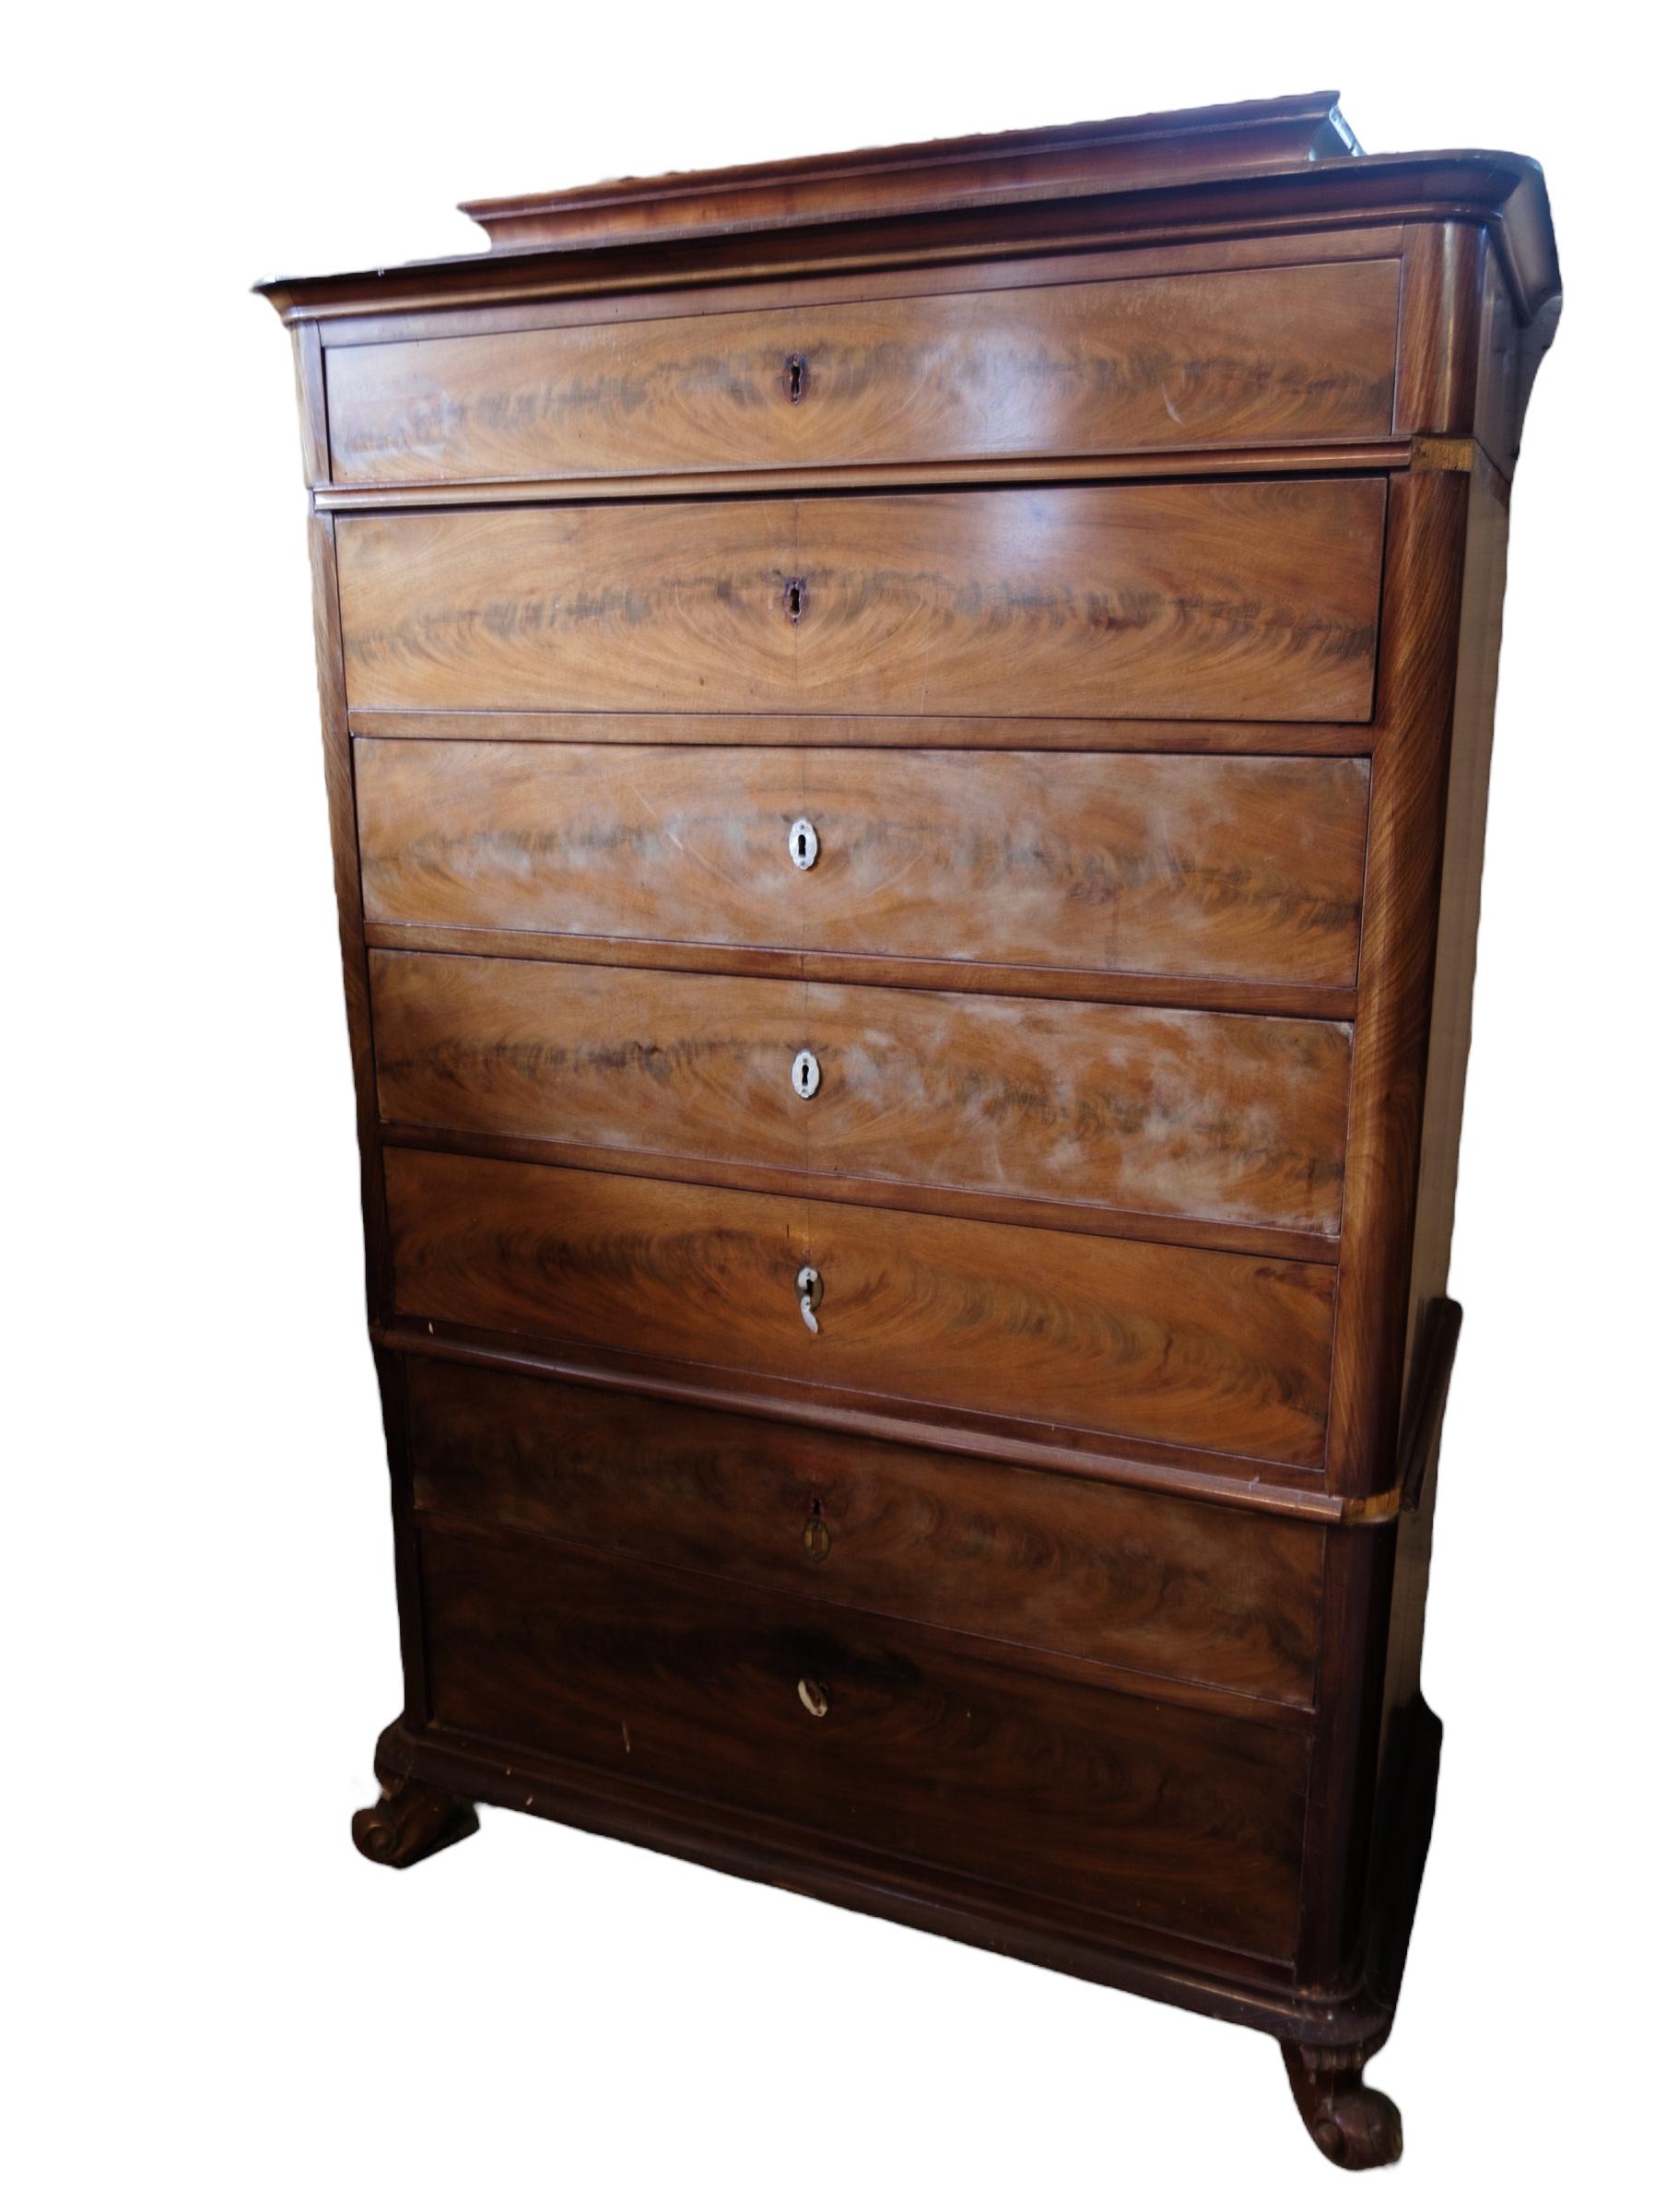 High mahogany chest of drawers with 7 drawers from around the 1840s. Will be inspected at the workshop before possible sale.
Measurements in cm: H:154 W:95 D:46